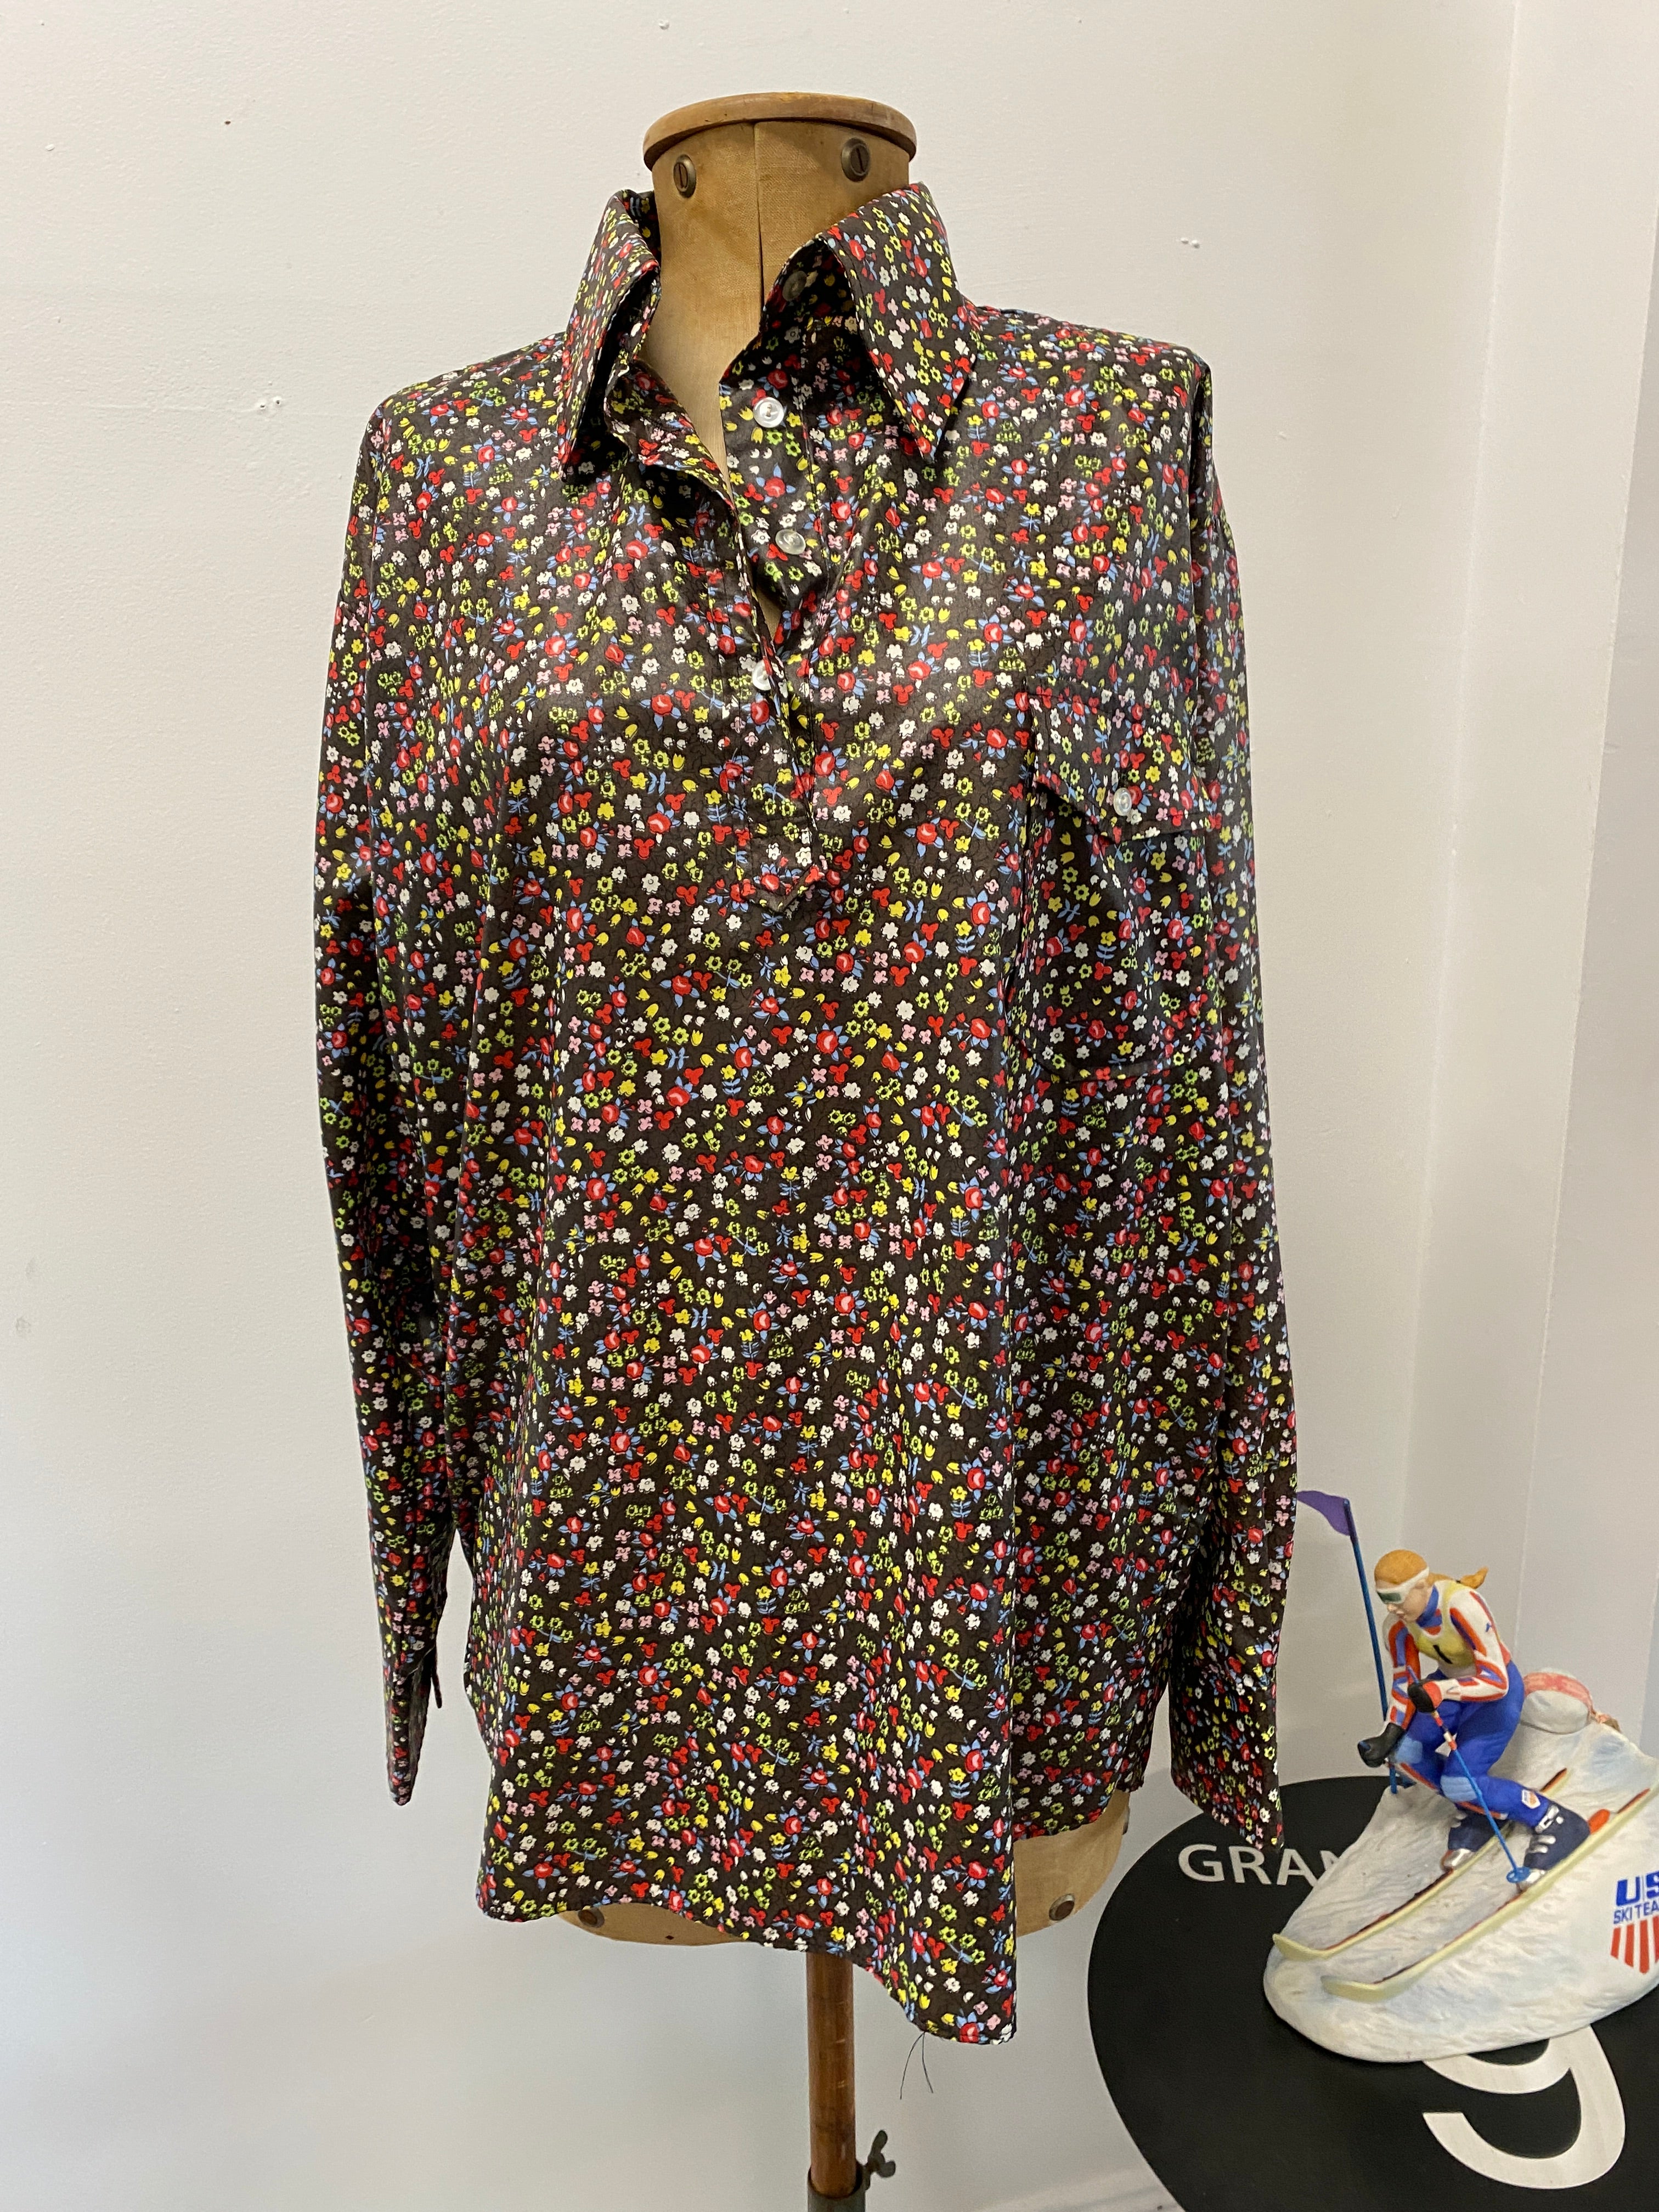 Vintage Obermyer brown floral wind shirt. Front view